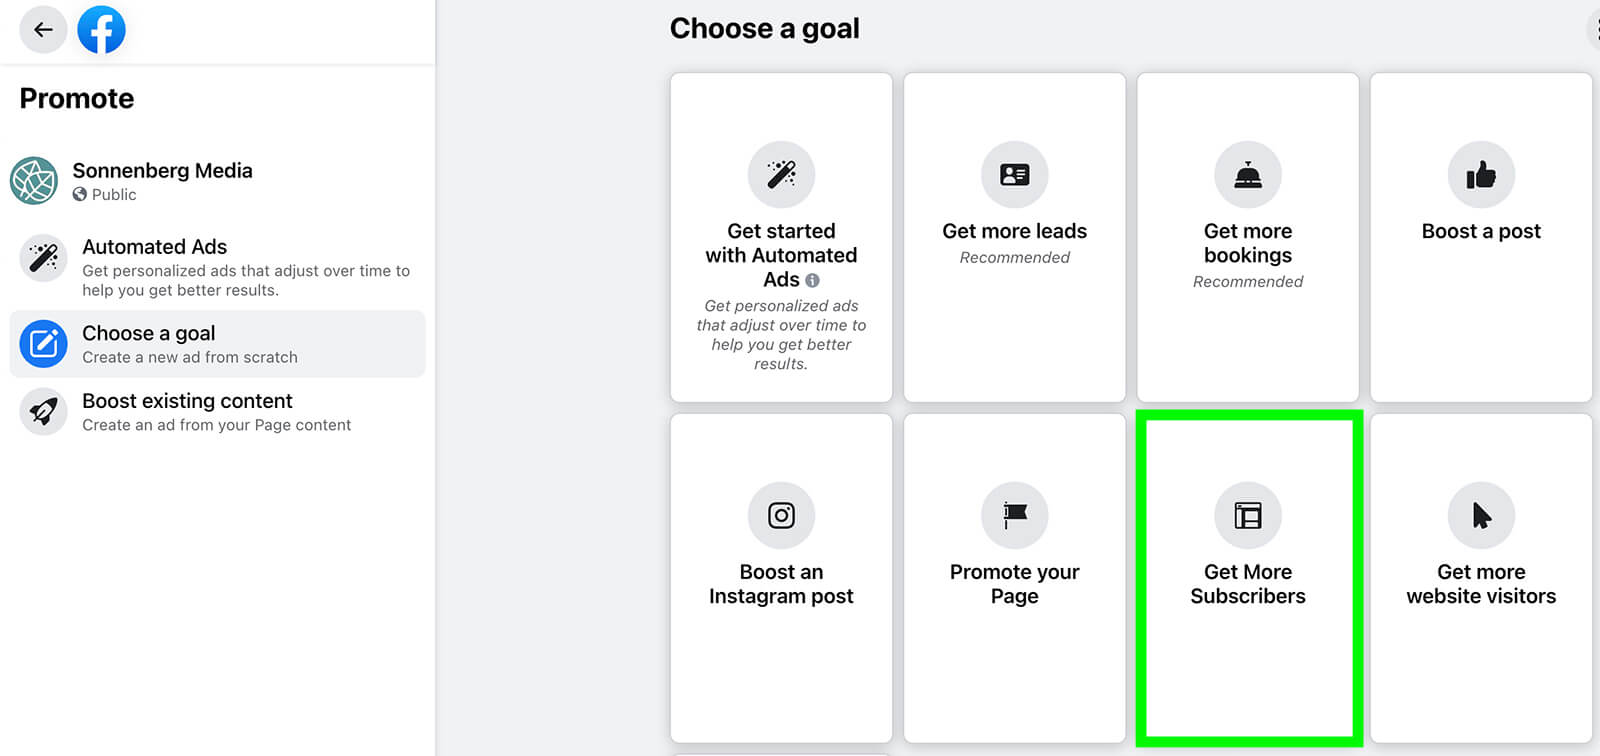 how-to-promote-your-sign-up-action-button-on-facebook-goals-get-more-subscribers-example-10